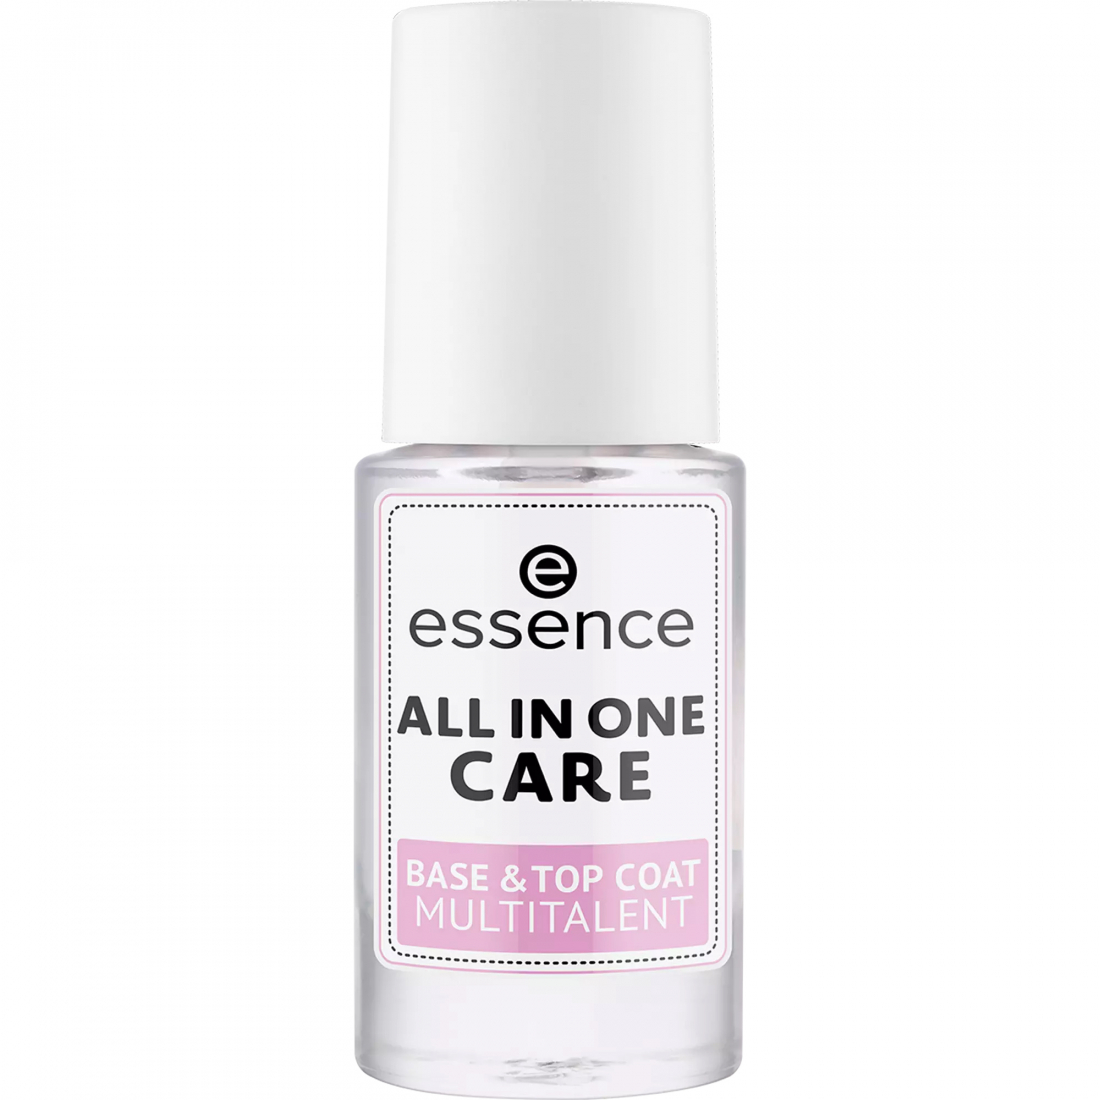 Couche de Base et Top Coat 'All In One Care Multifonction' - 8 ml